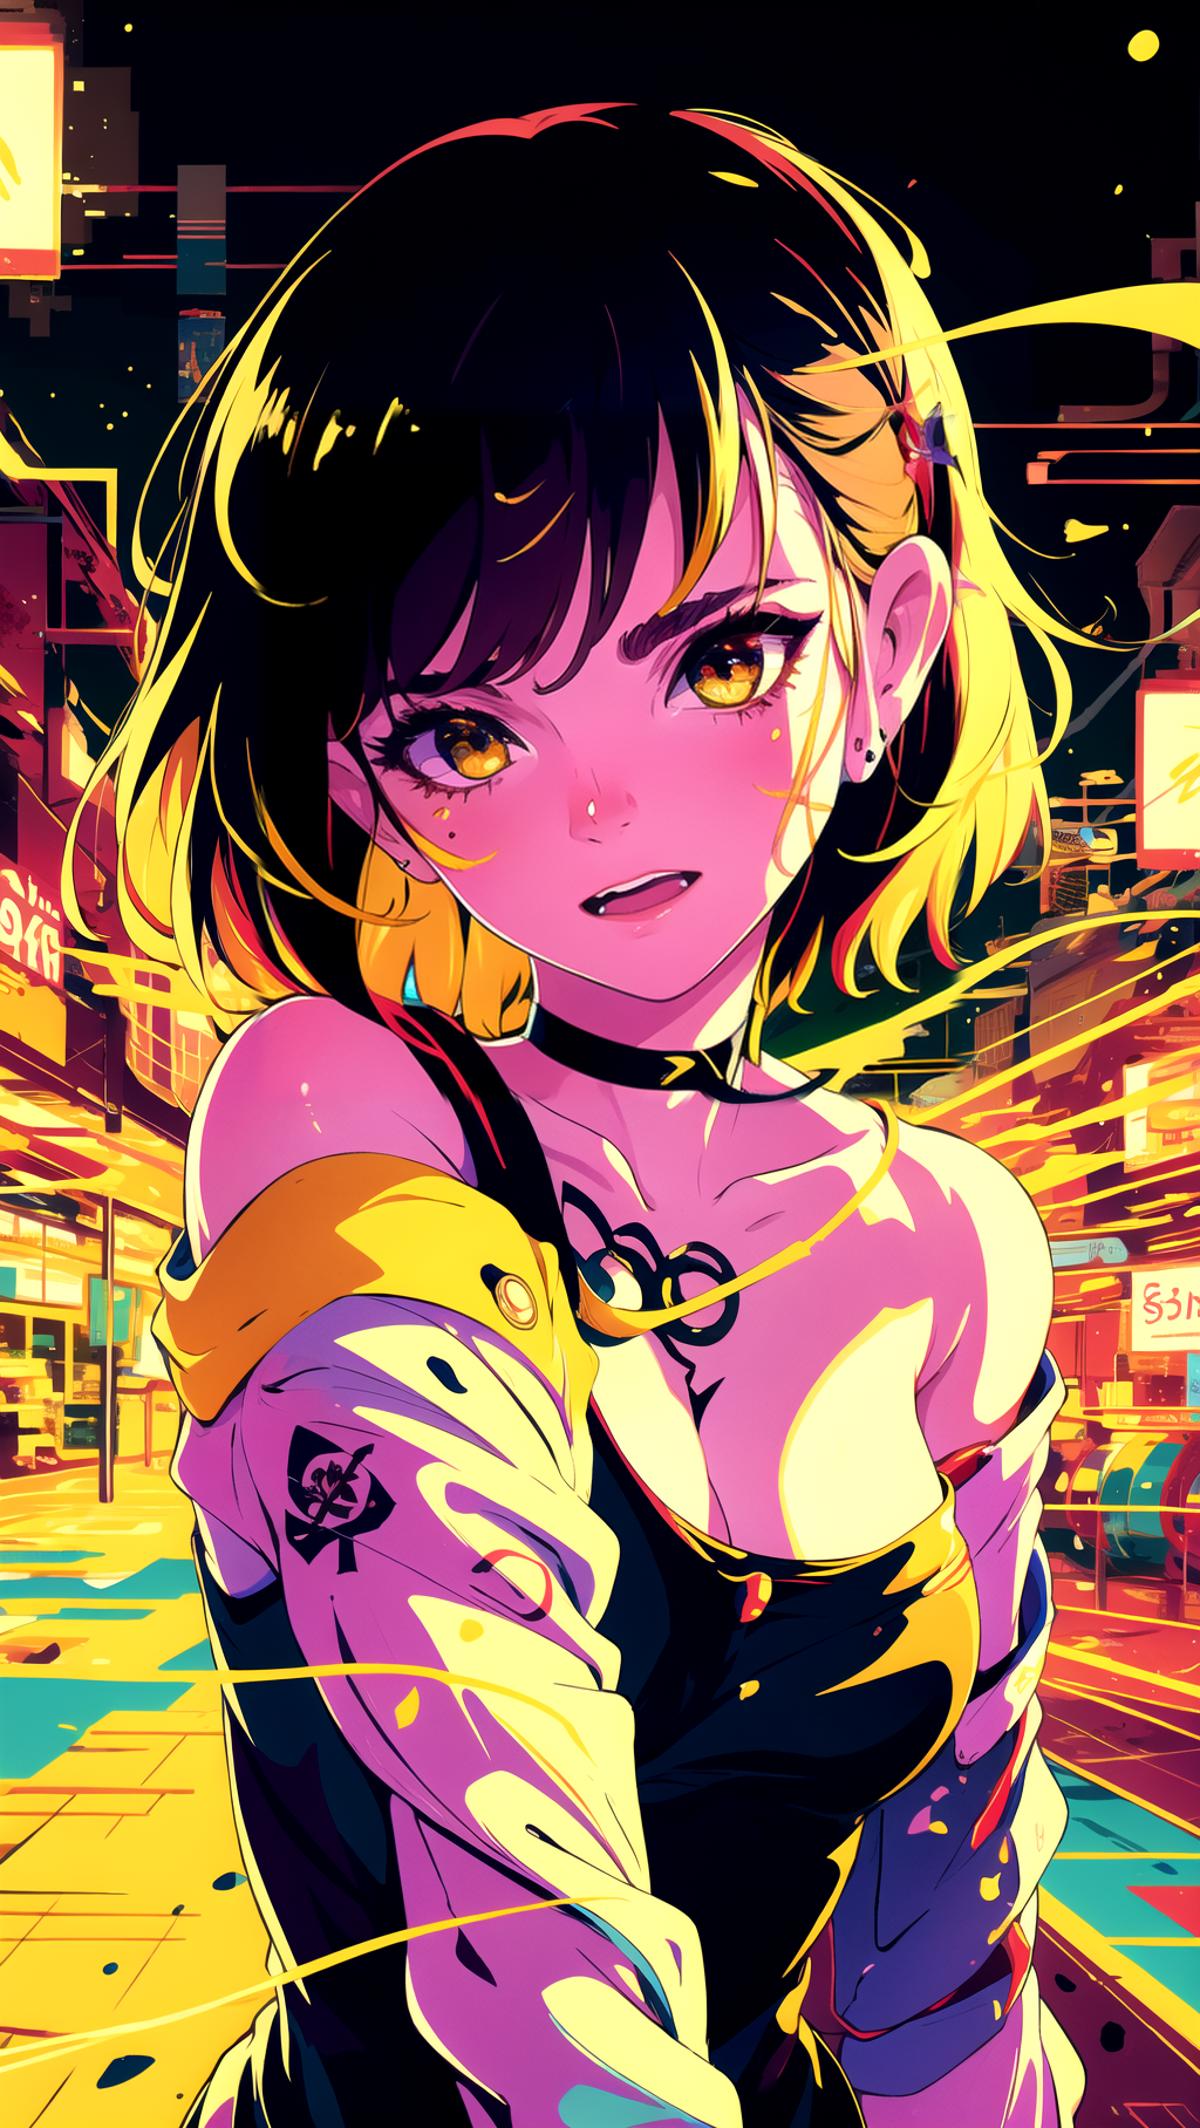 Anime-style girl with a black shirt and yellow accents.